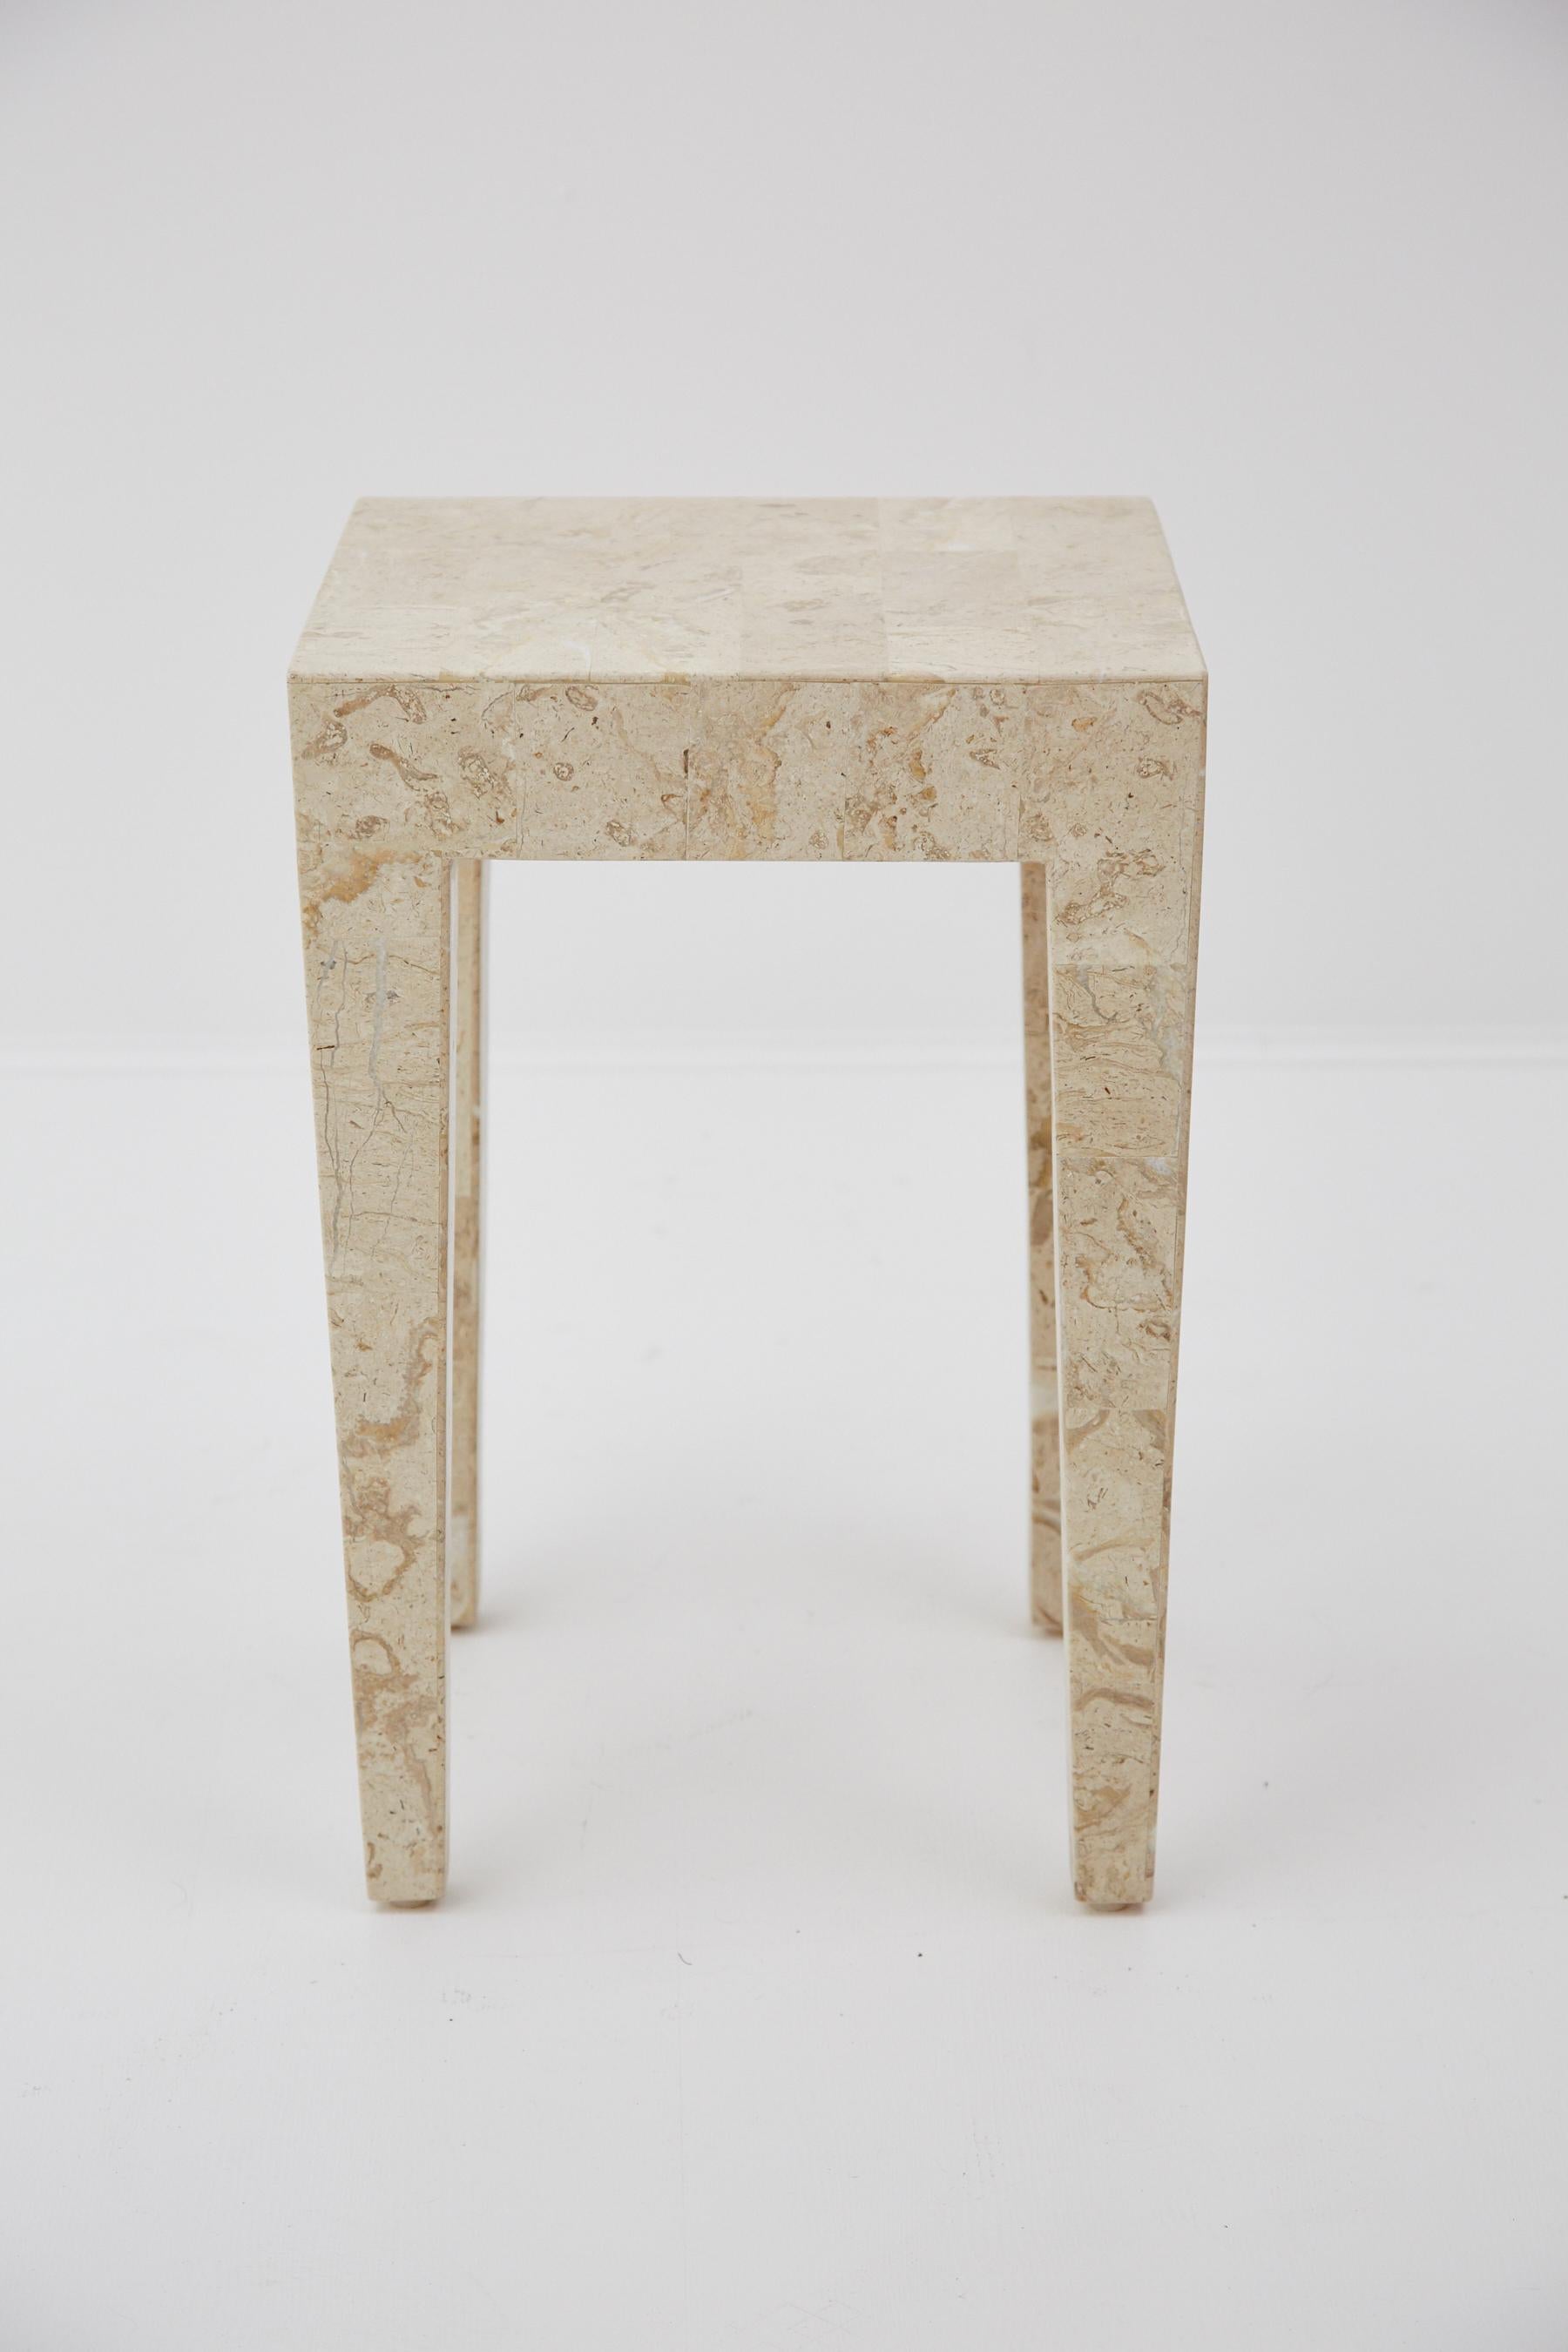 Side table comprised of fiberglass body inlaid with tessellated cantor stone throughout. A simple and modern form to add form and texture to any interior. Measures: 21 in tall.